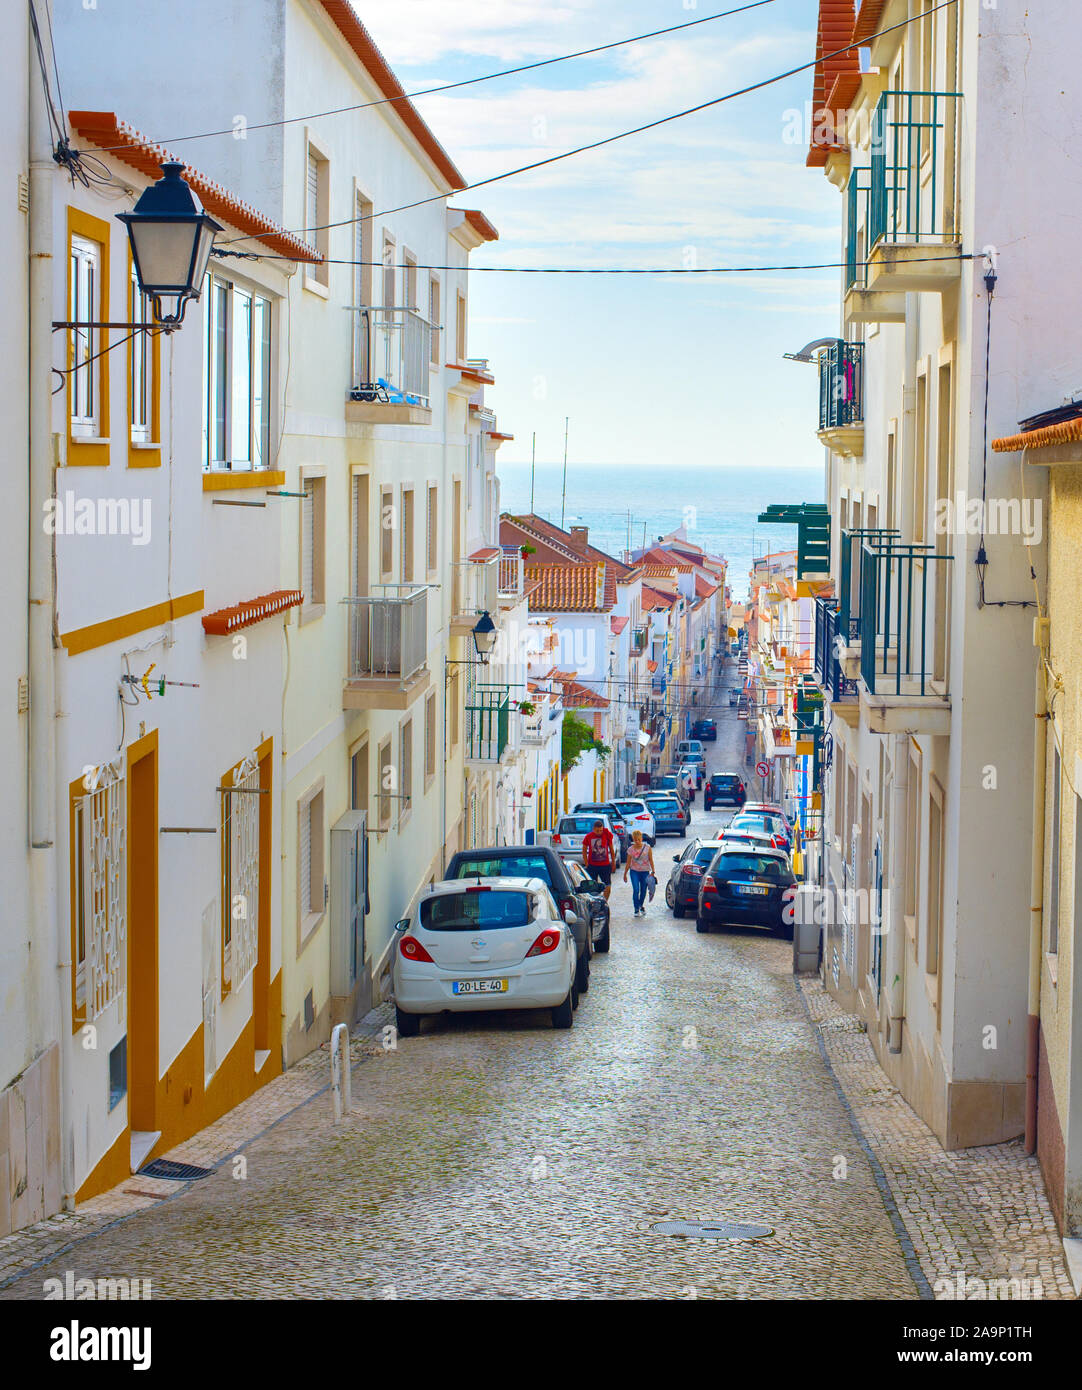 NAZARE, PORTUGAL - OCTOBER 9, 2018: People walking up the street in Nazare. Nazare is the famous tourist destination in Portugal Stock Photo